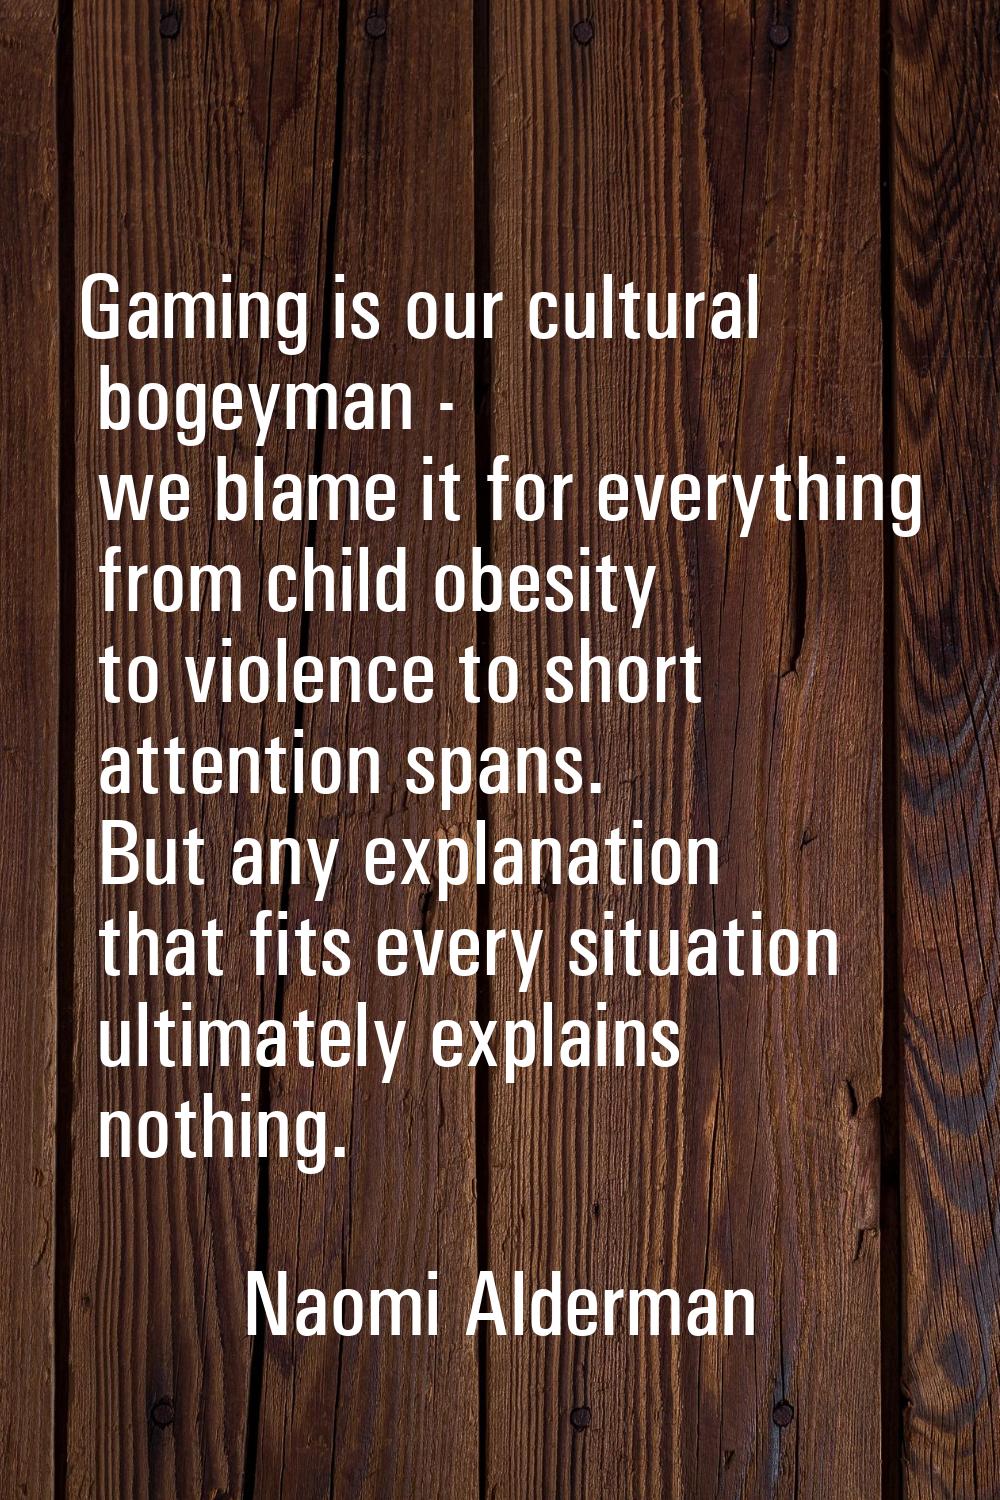 Gaming is our cultural bogeyman - we blame it for everything from child obesity to violence to shor